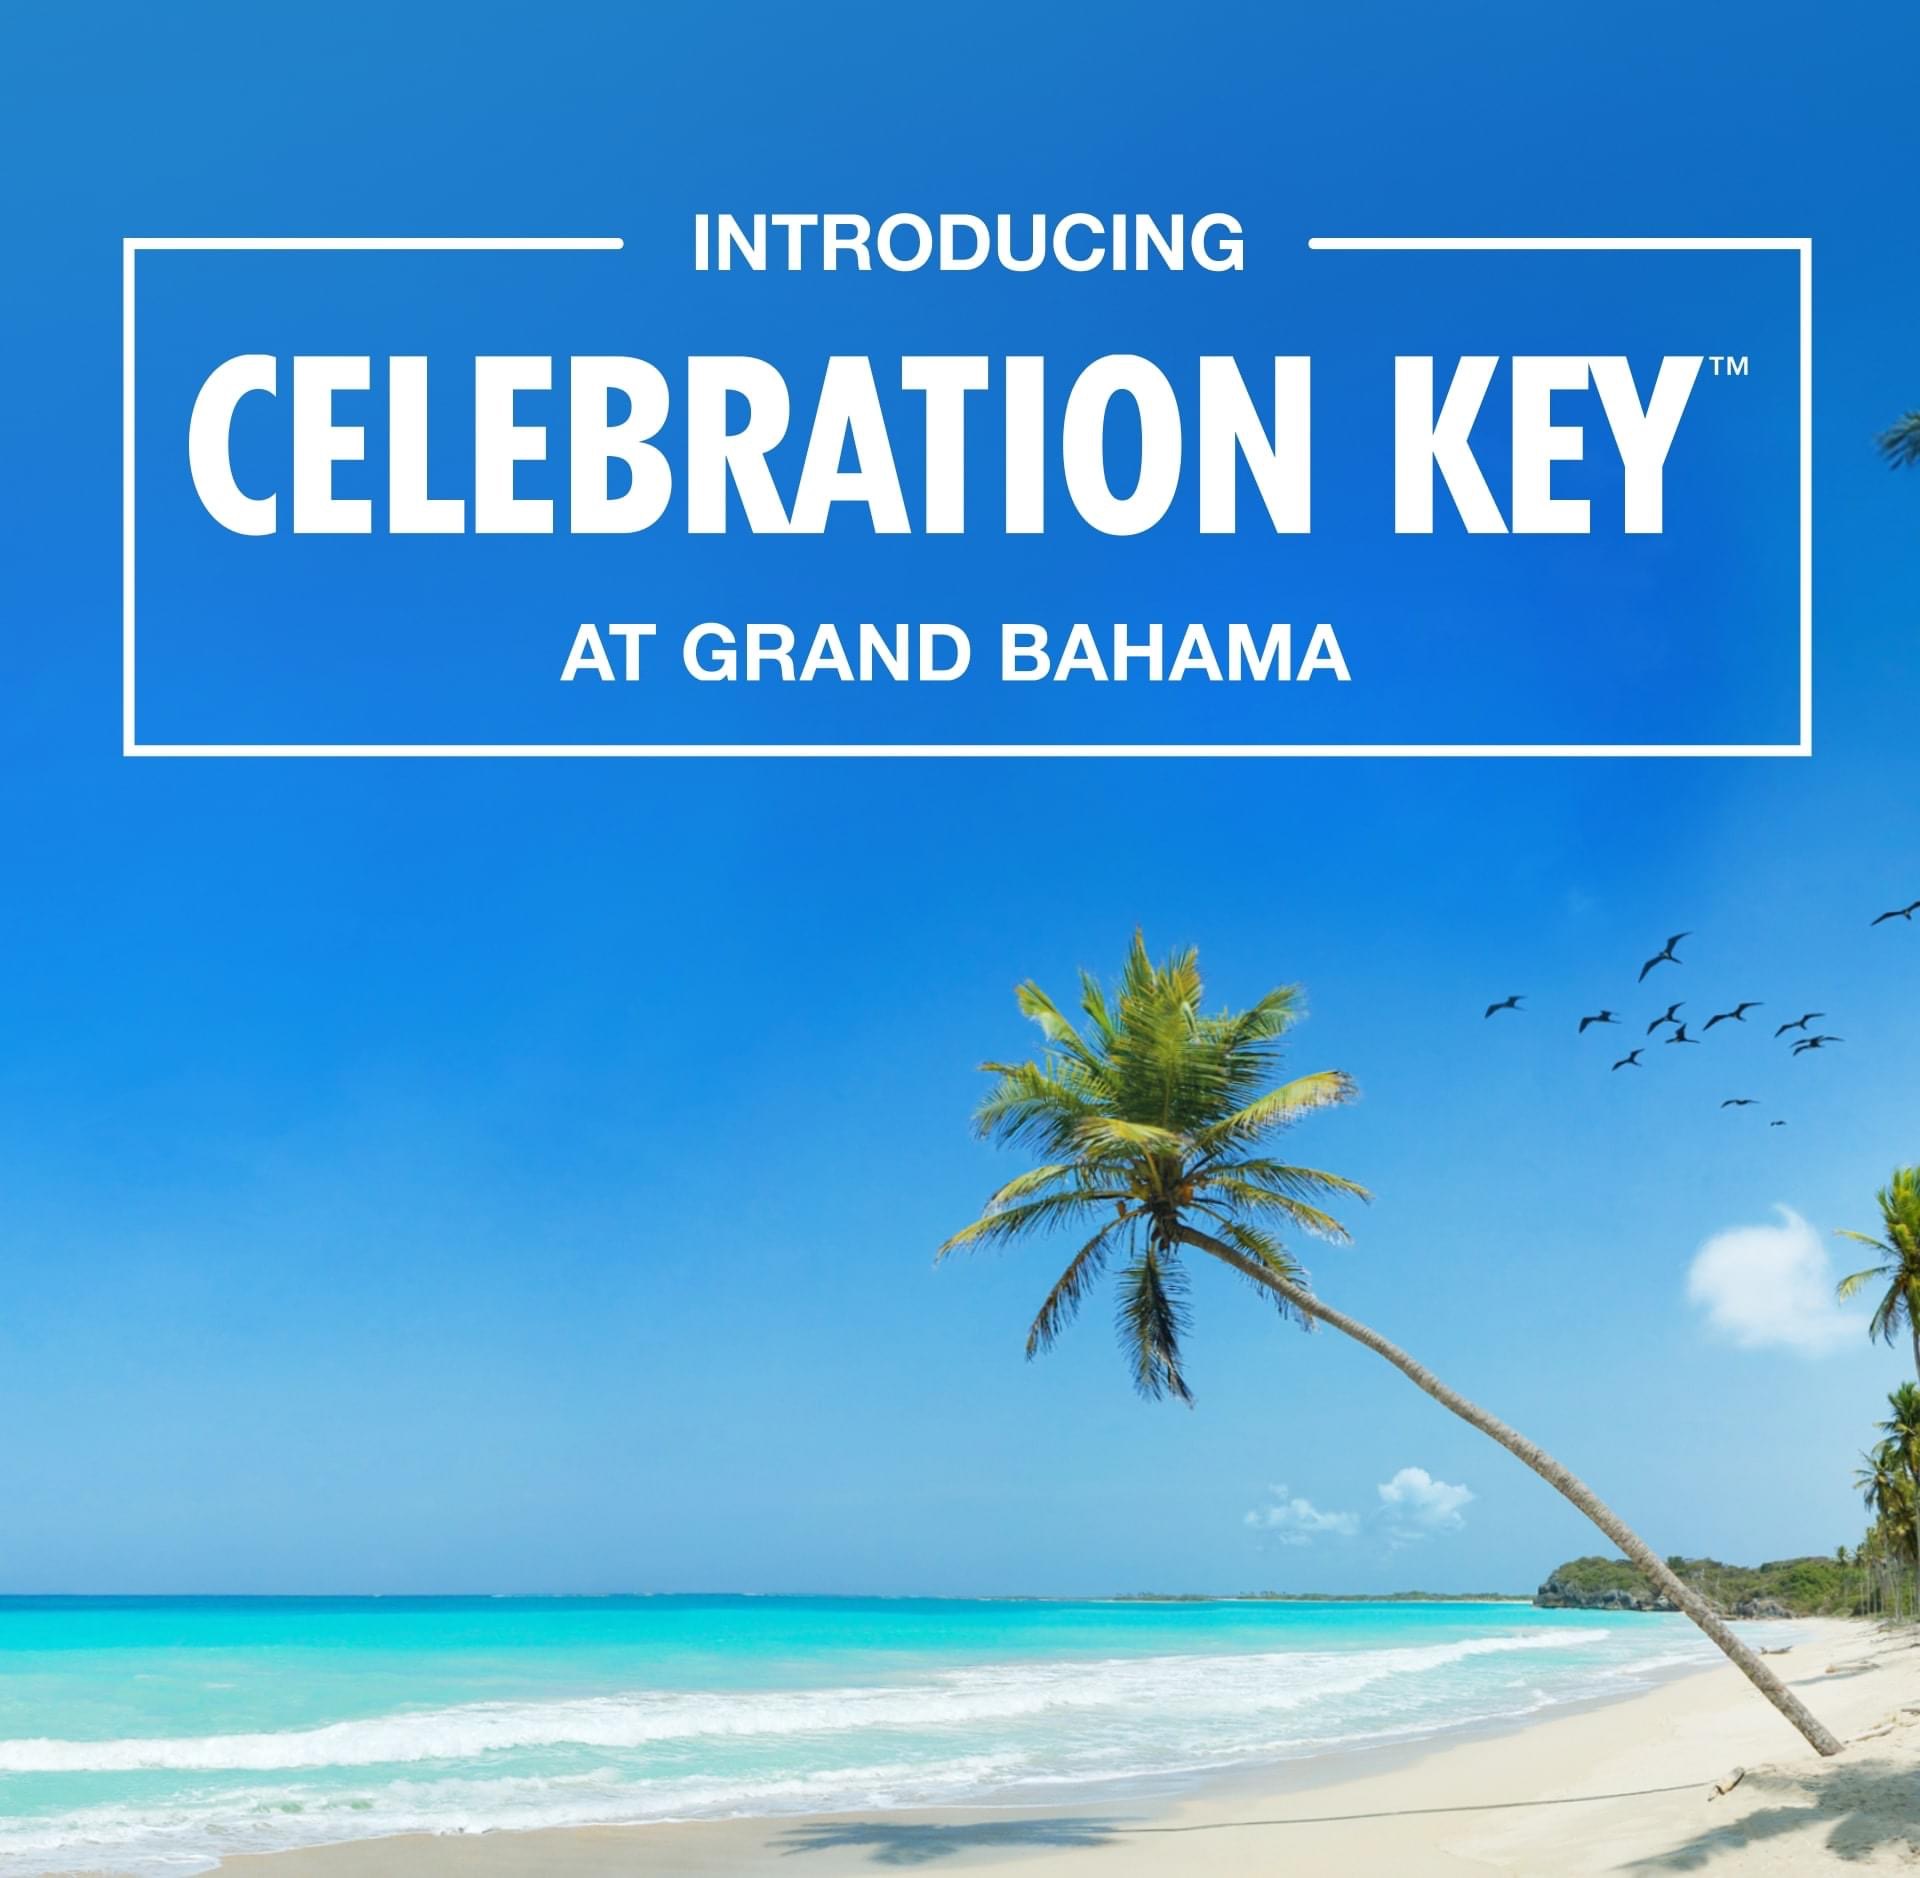 Carnival Cruise Line Invites Guests to be the “First to Know About Celebration Key” Details and Updates